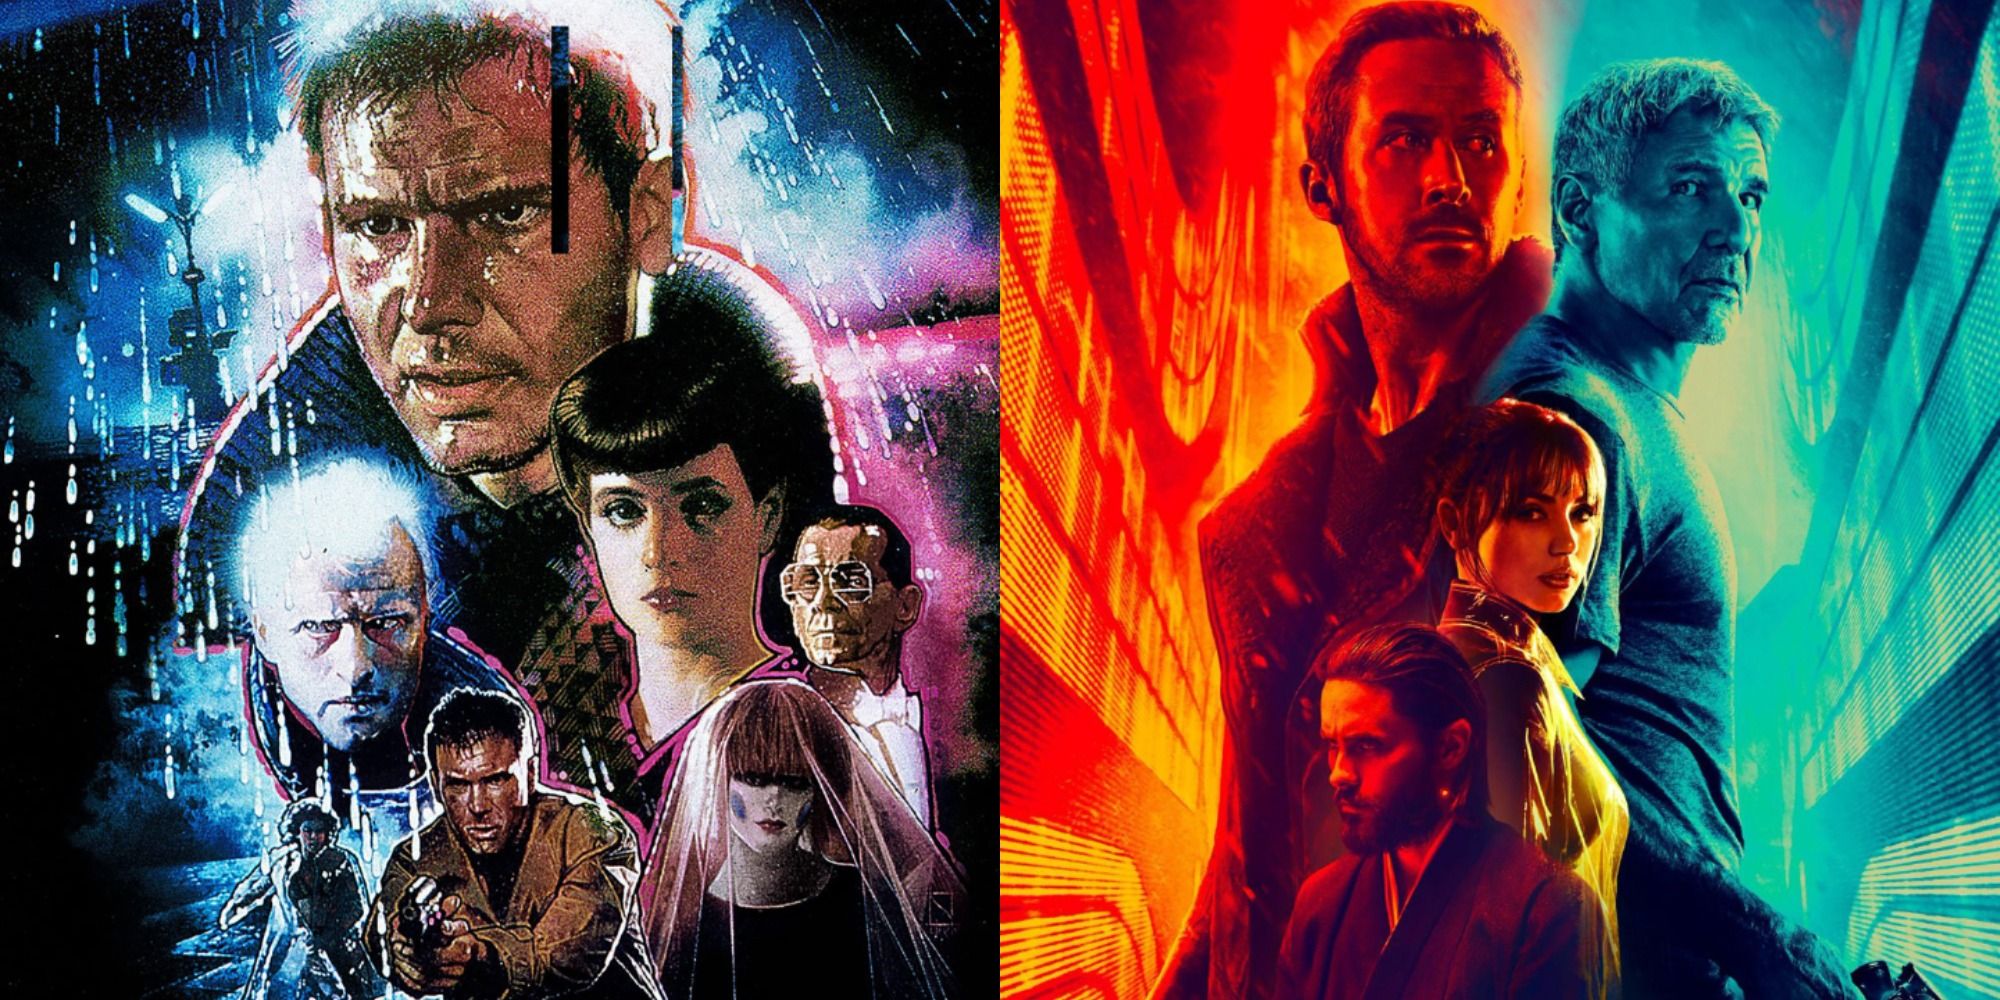 combined posters for Blade Runner 1 and 2049 featuring Harrison Ford, Ryan Gosling, Ana de Armas